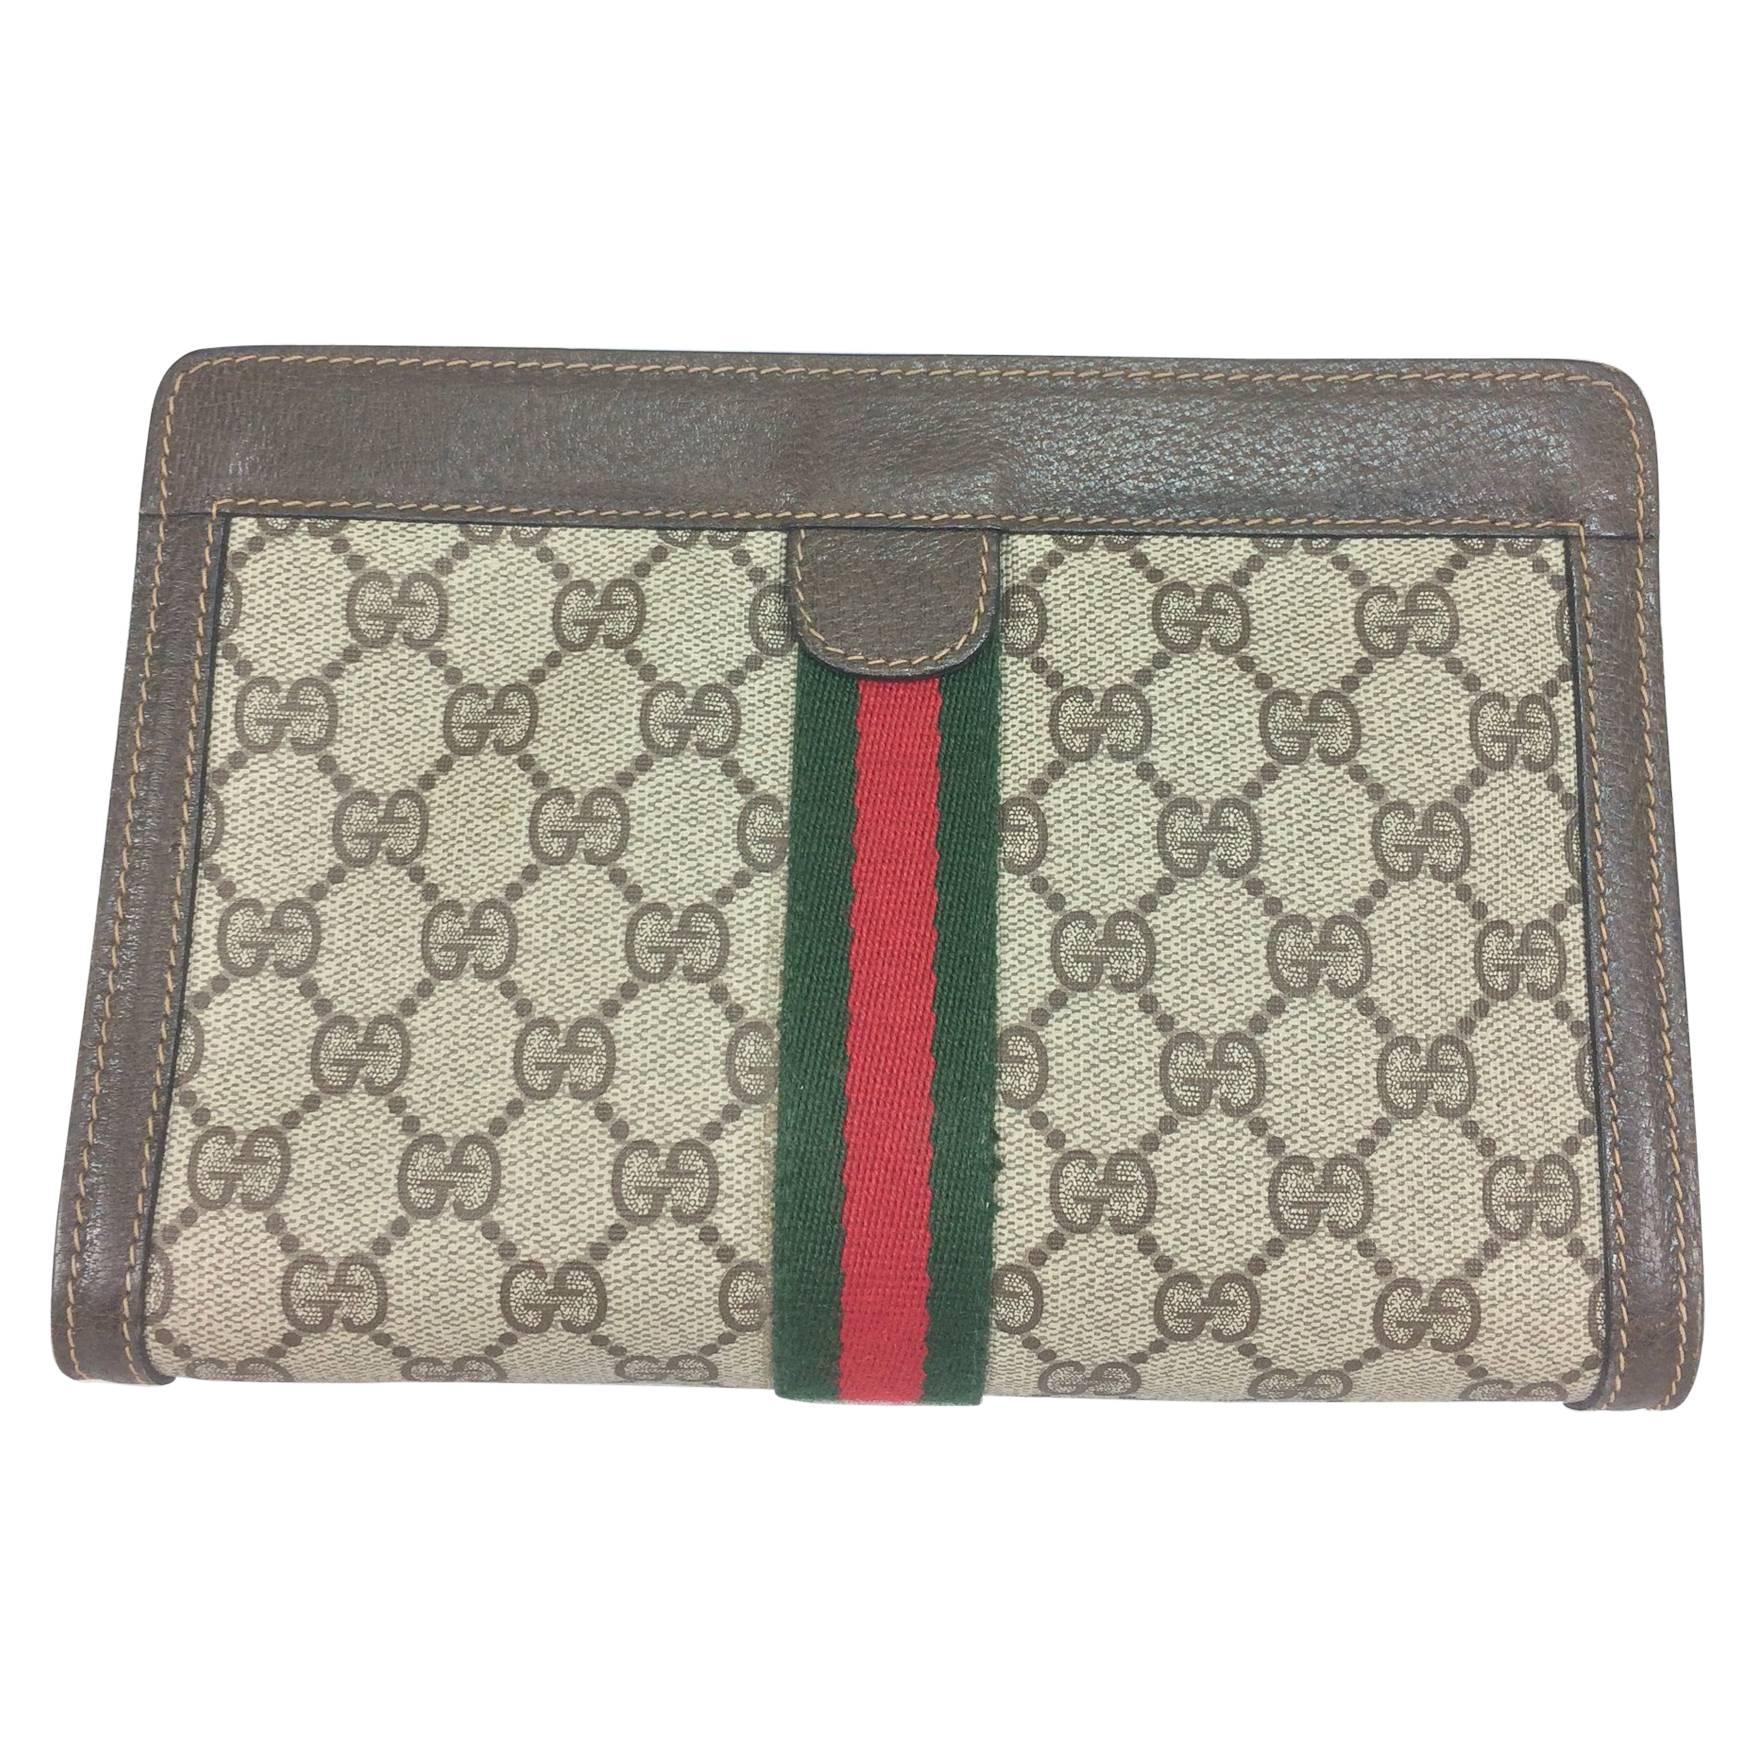 Vintage Gucci Accessories Collection cosmetics clutch bag 1970s